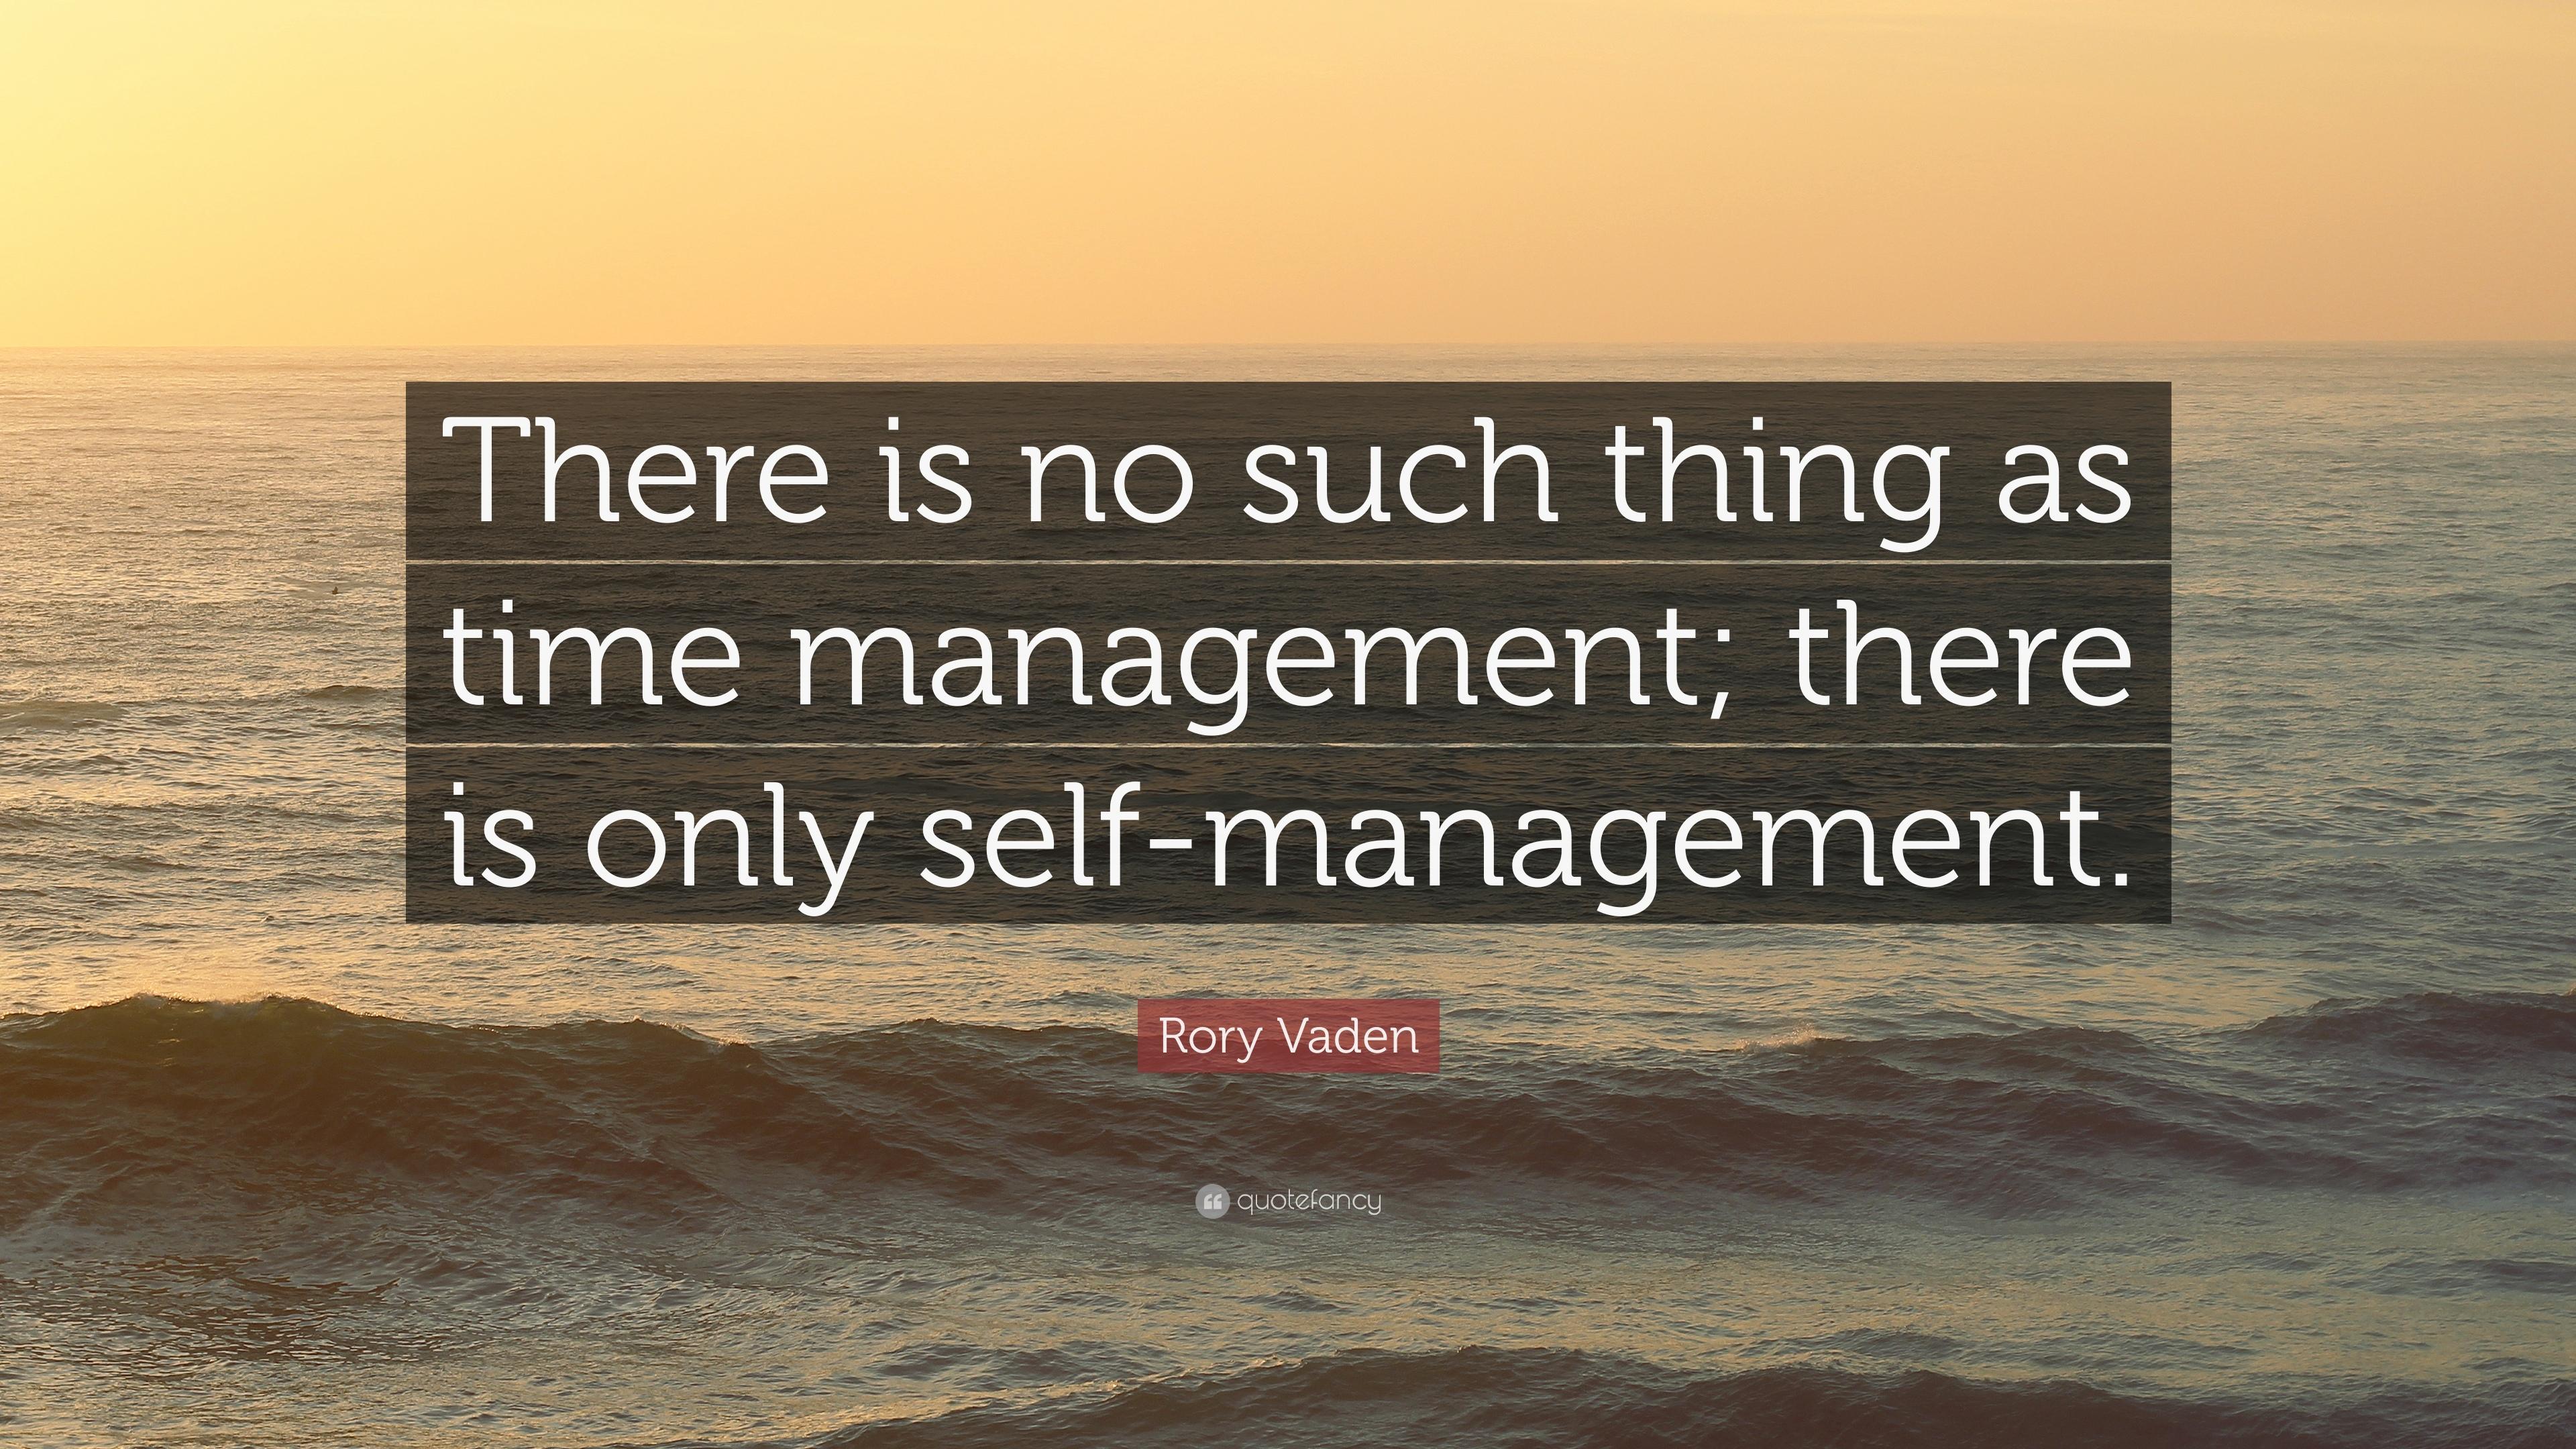 Rory Vaden Quote: “There is no such thing as time management